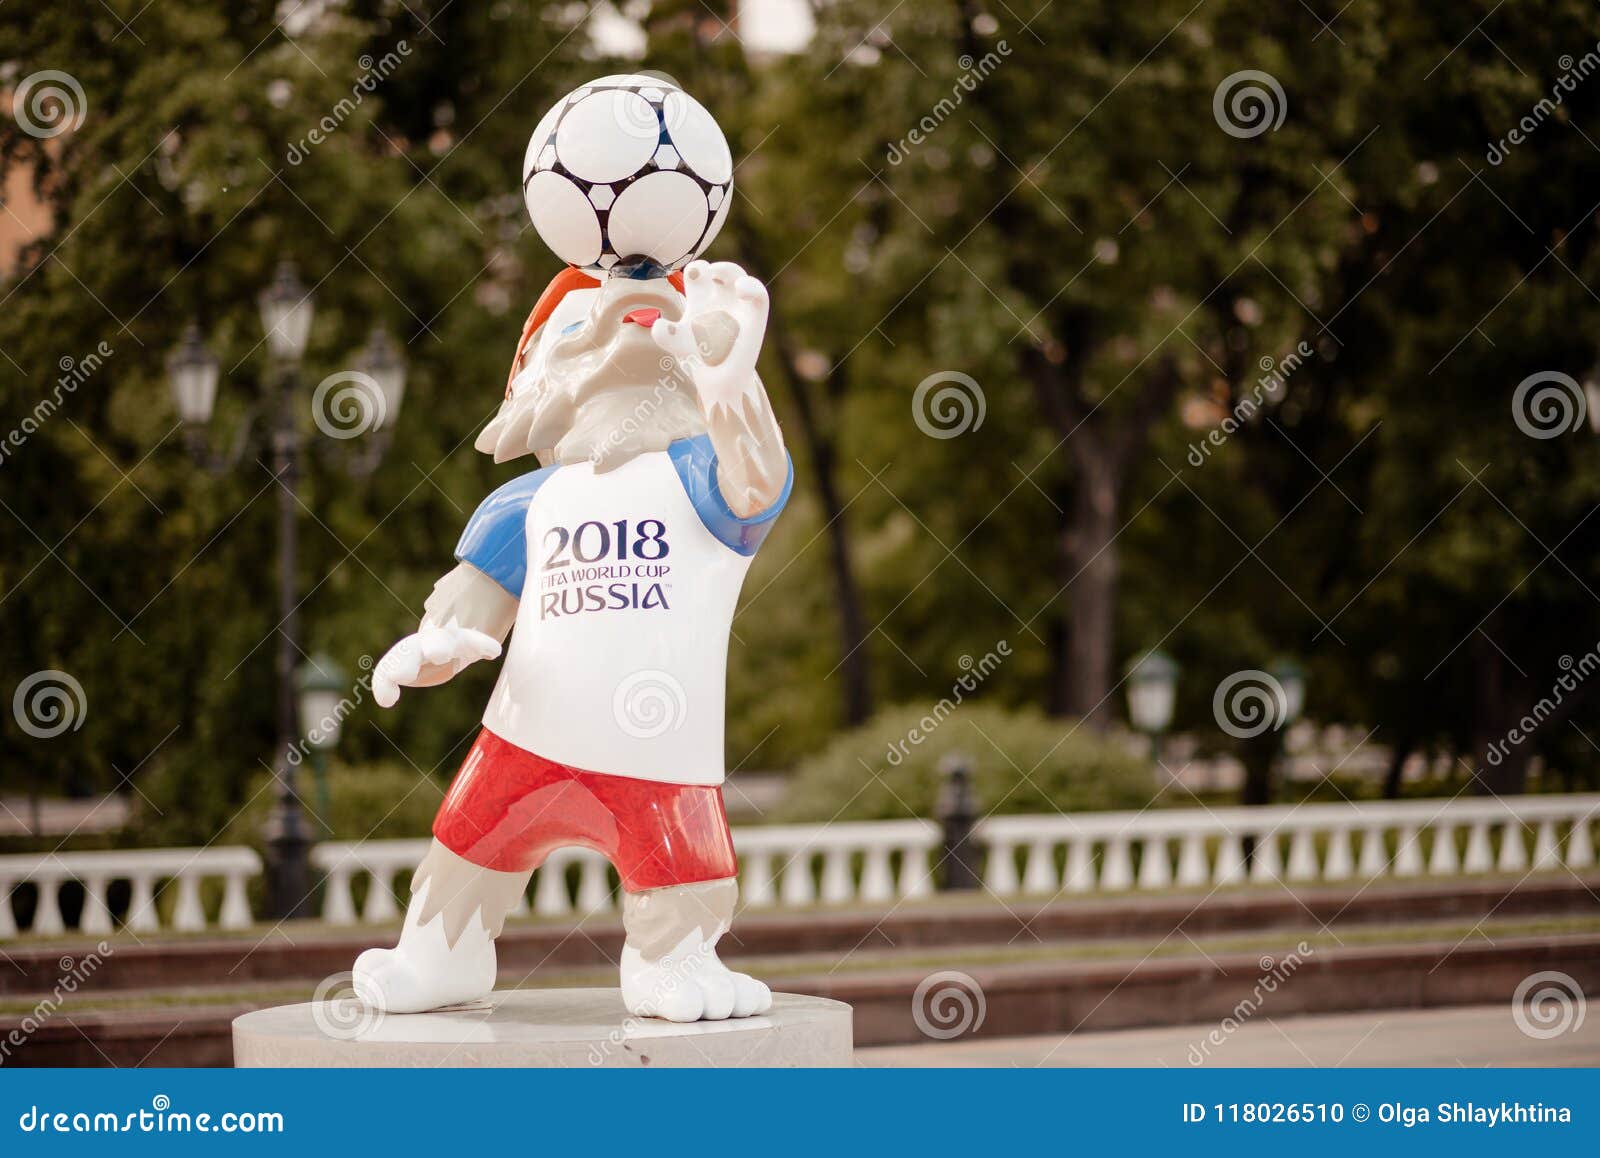 Moscow Russia May 31 2018 The Official Mascot Of The 2018 Fifa World Cup And The Fifa